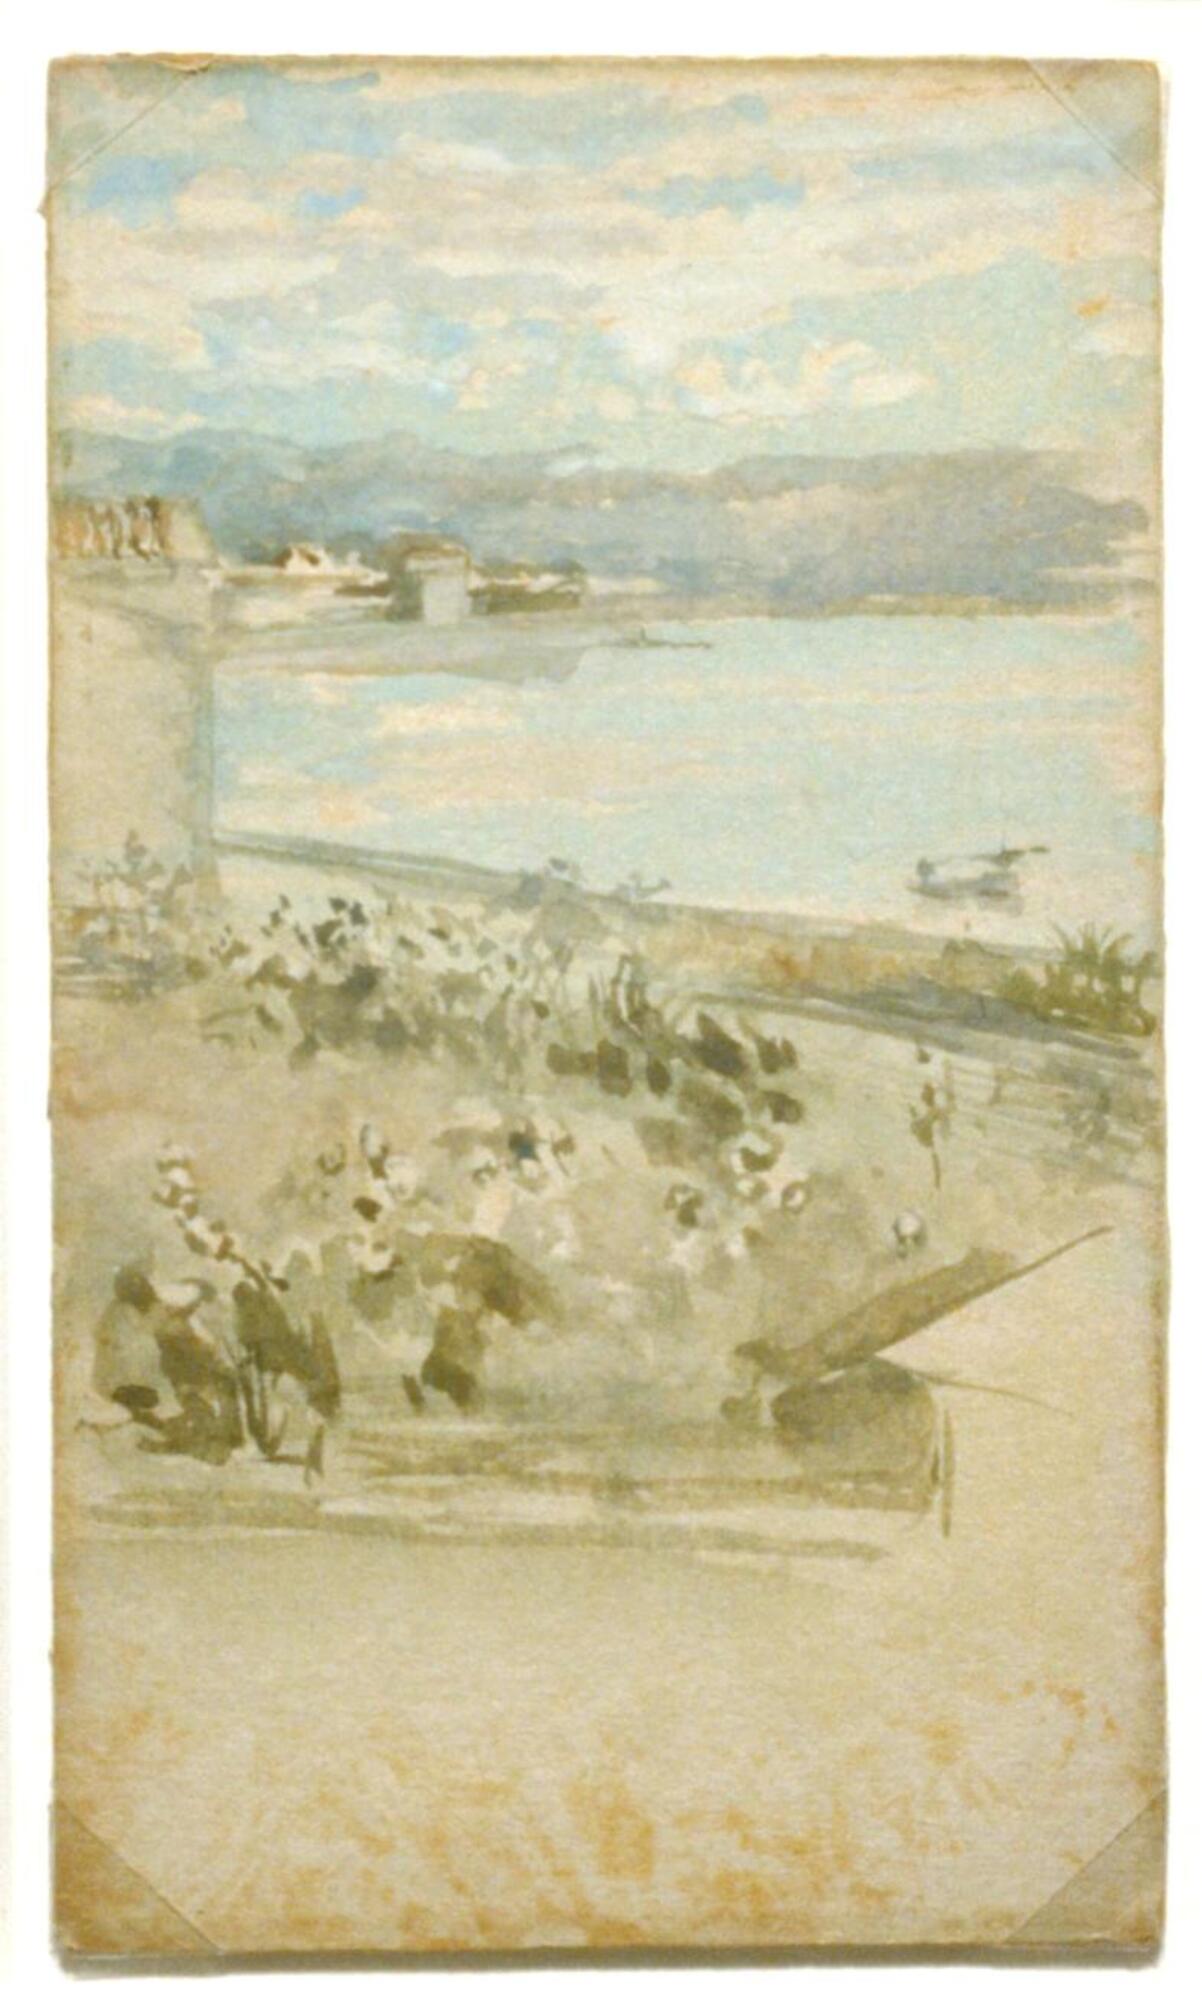 This watercolor on Japan paper, mounted on board, is vertically oriented. The piece is very dark, with the forms barely visible and very abstract. The upper quarter of the piece is blue, white, and pink (presumably a morning sky). In the next quarter down is what appears to be a body of water reflecting the sky, which a city and hills on the fall side of the shore from the viewer. The lower half the work has abstract figures in brown and cream that appear to be on the shore. Compositionally, there is a zig-zag recession into space. The piece is surrounded by the white border of the board that it is mounted on.